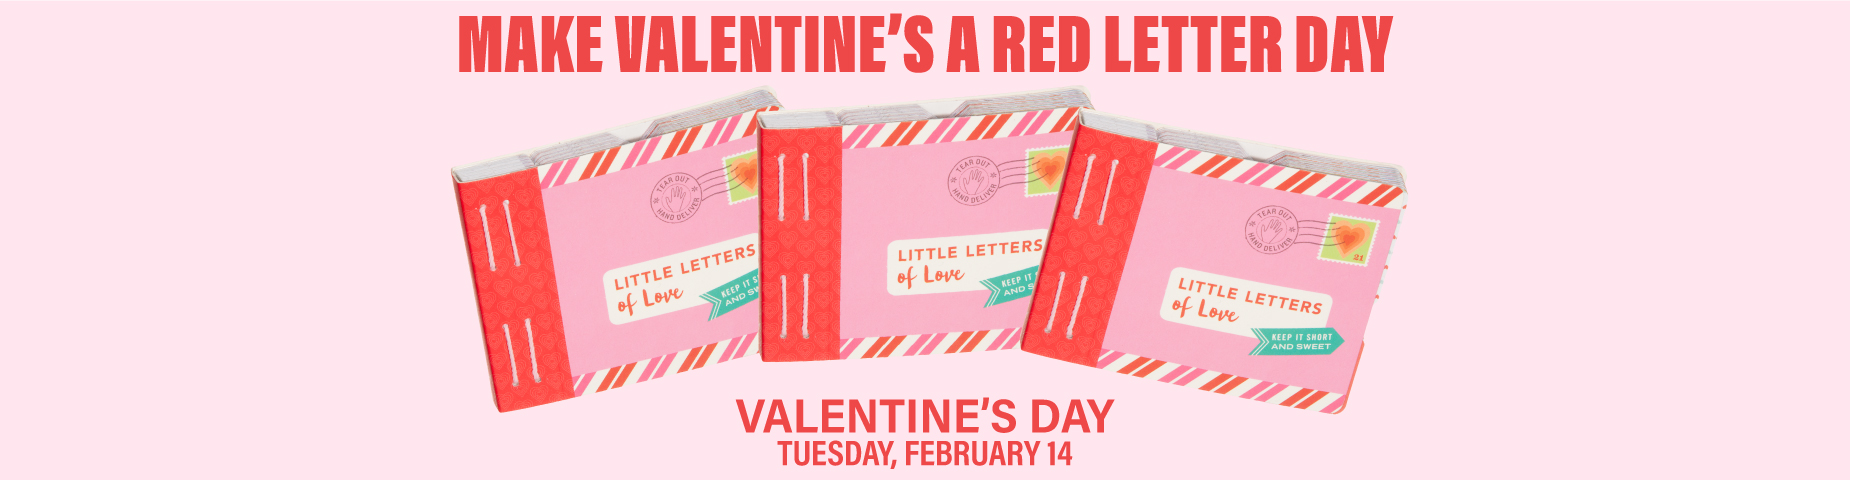 MAKE VALENTINE’S A RED LETTER DAY: Valentine's Day: Tuesday, February 14